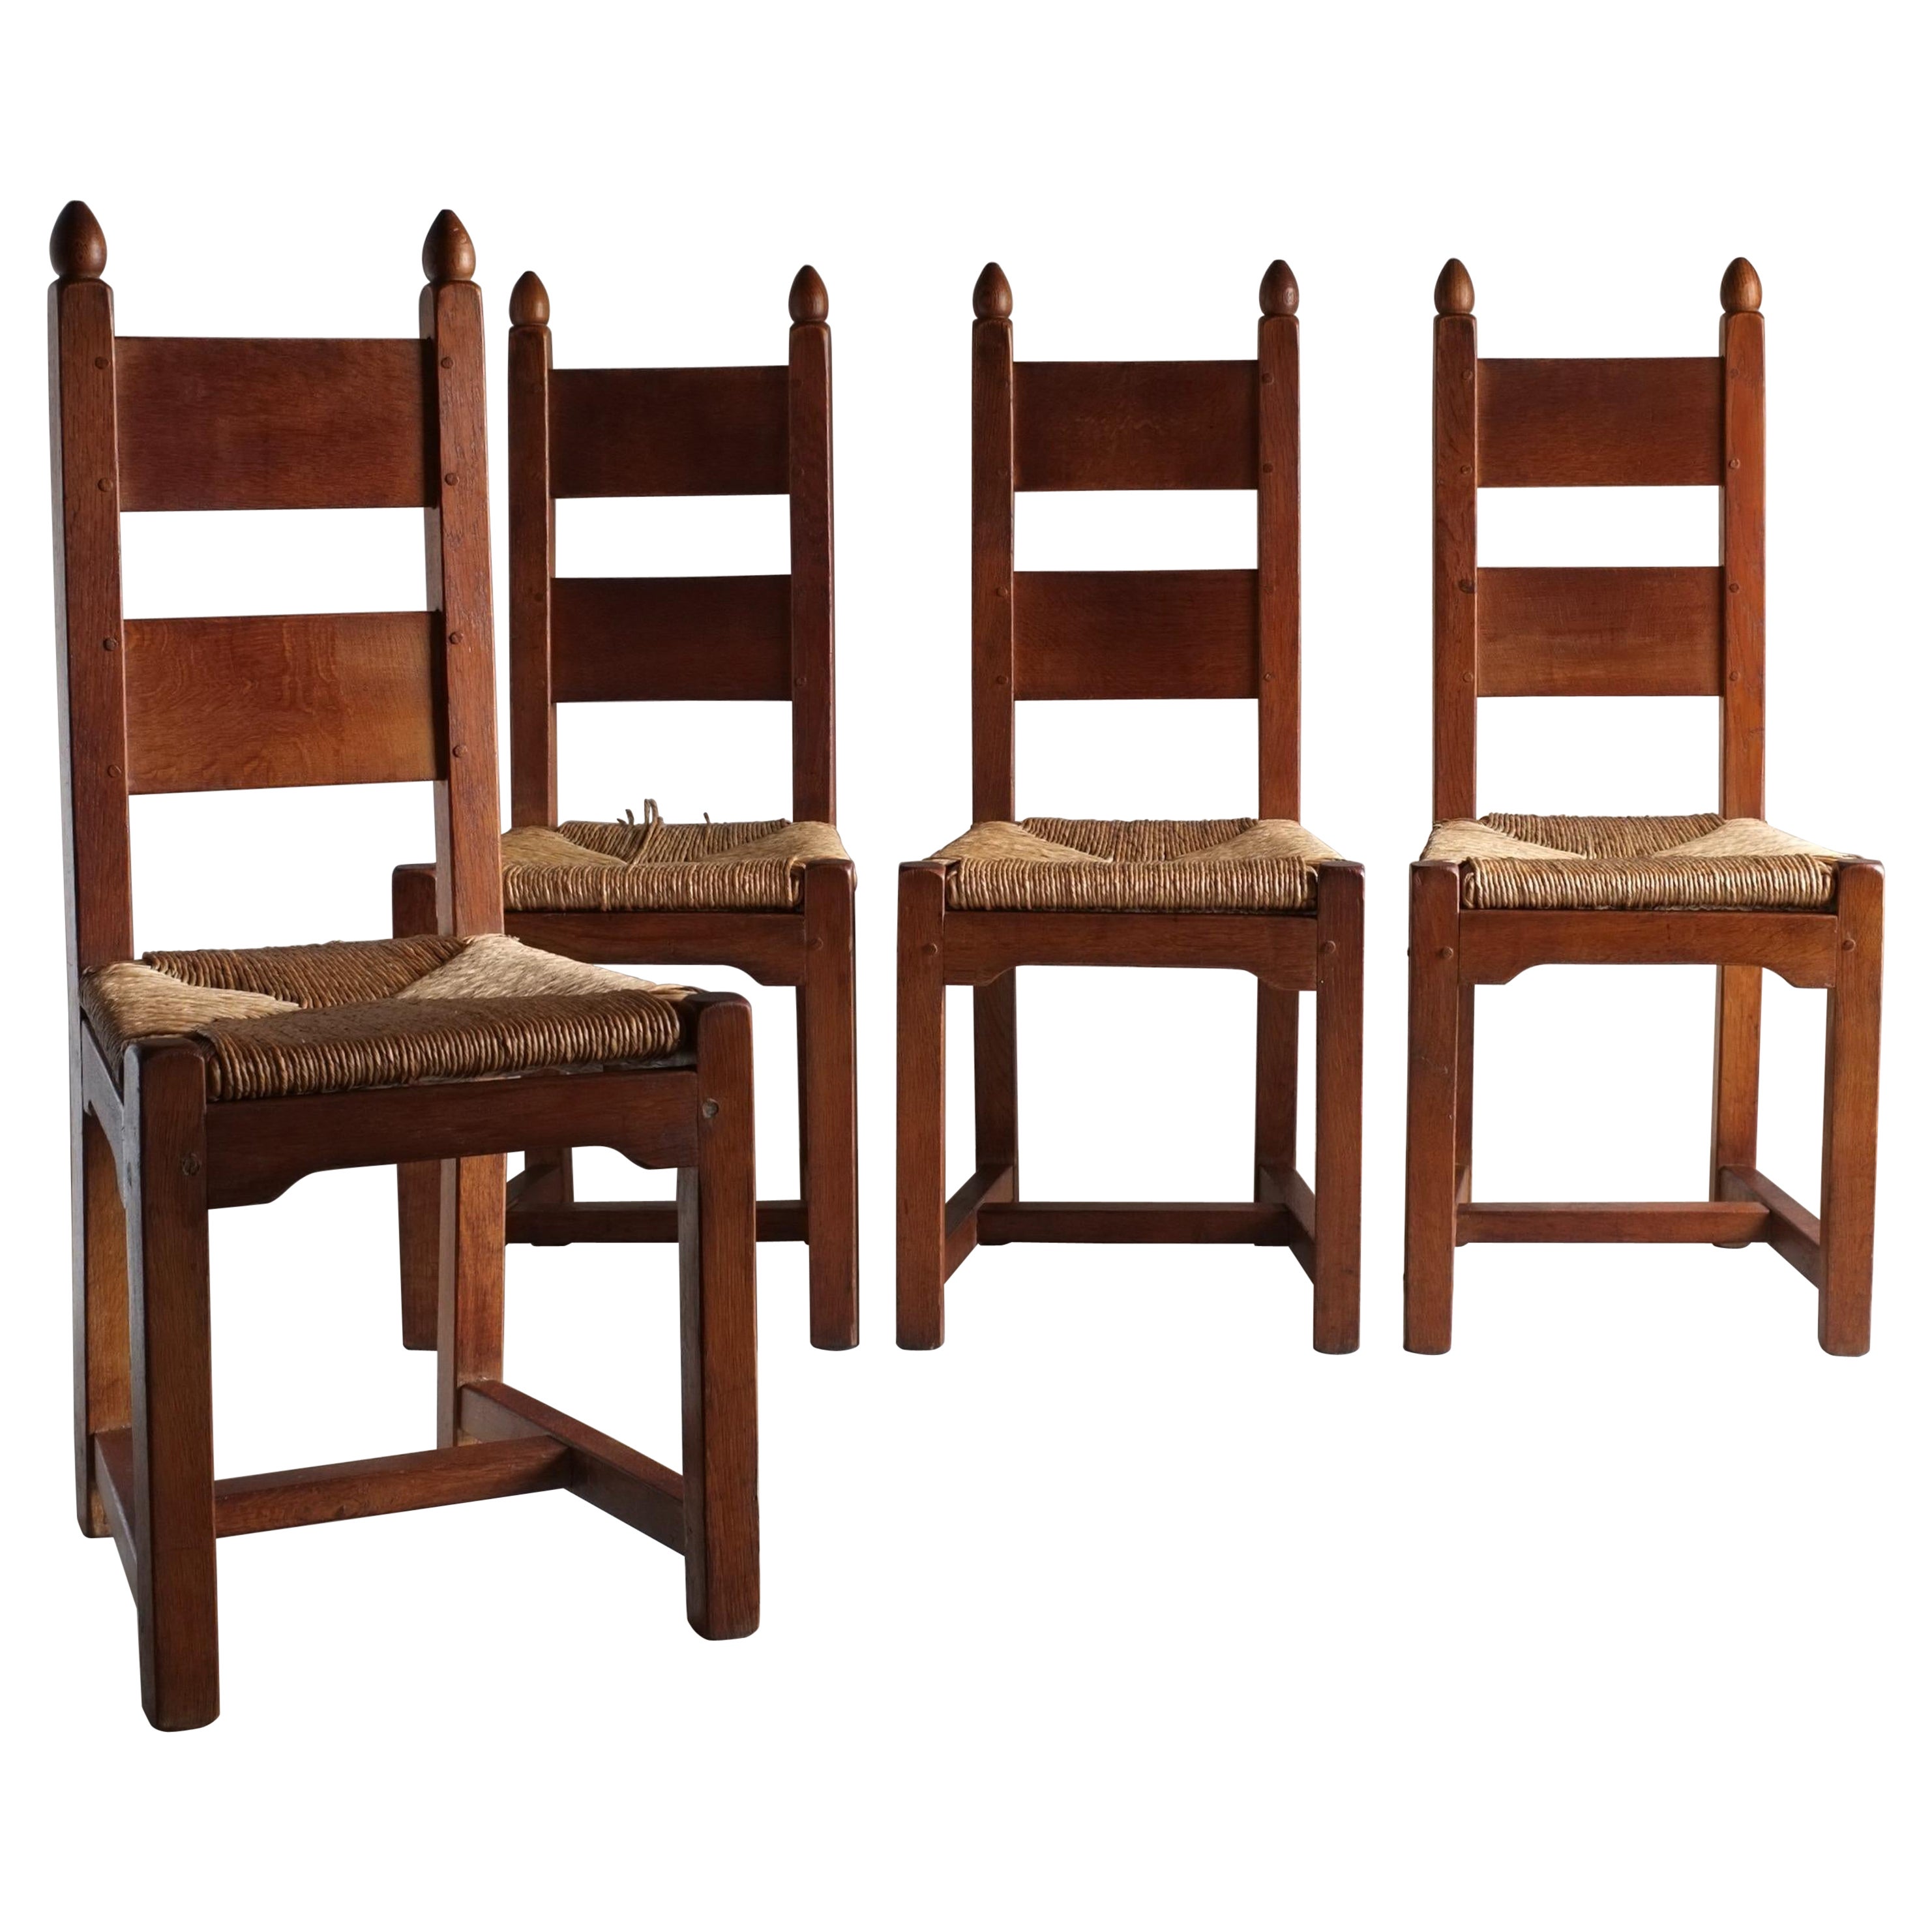 4 Brutalist Oak Rush Seat Chairs, France 1960s For Sale